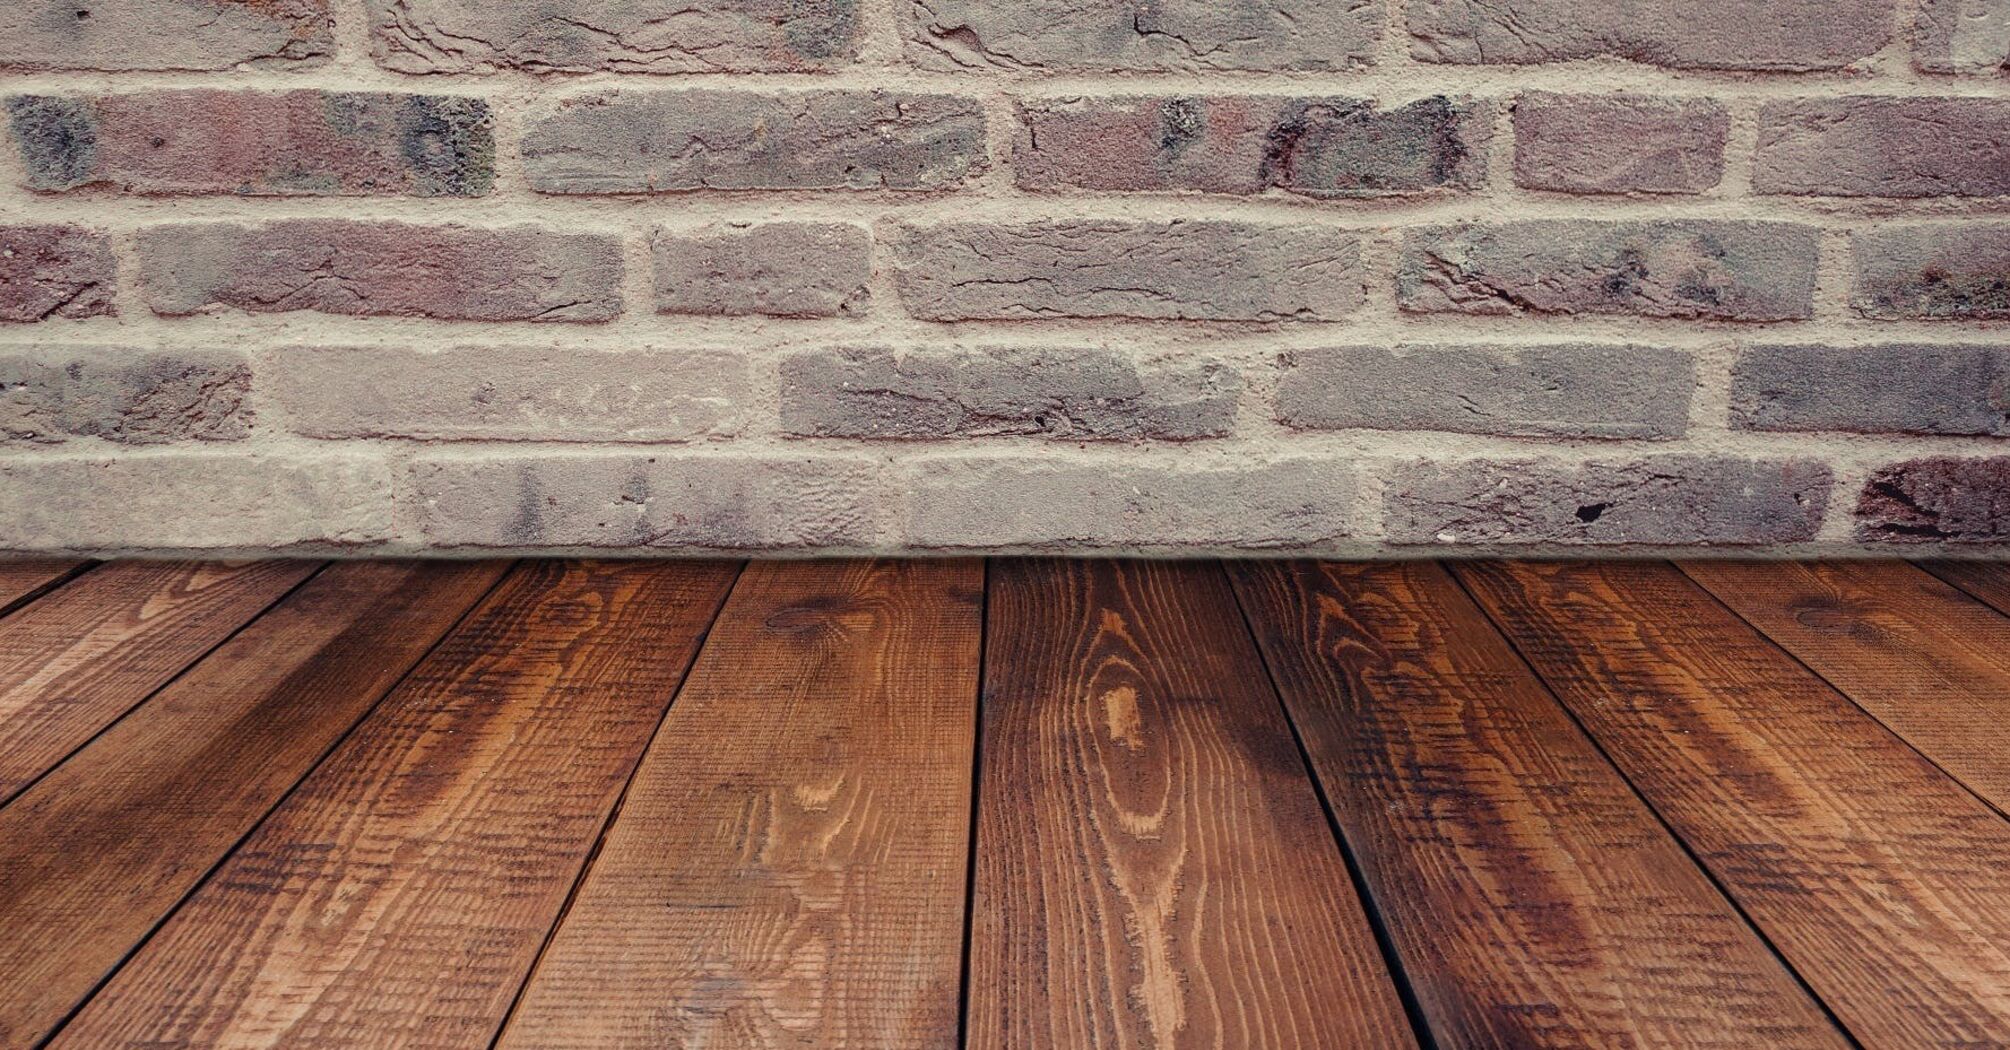 Ensuring longevity and preserving the beauty of wooden floors